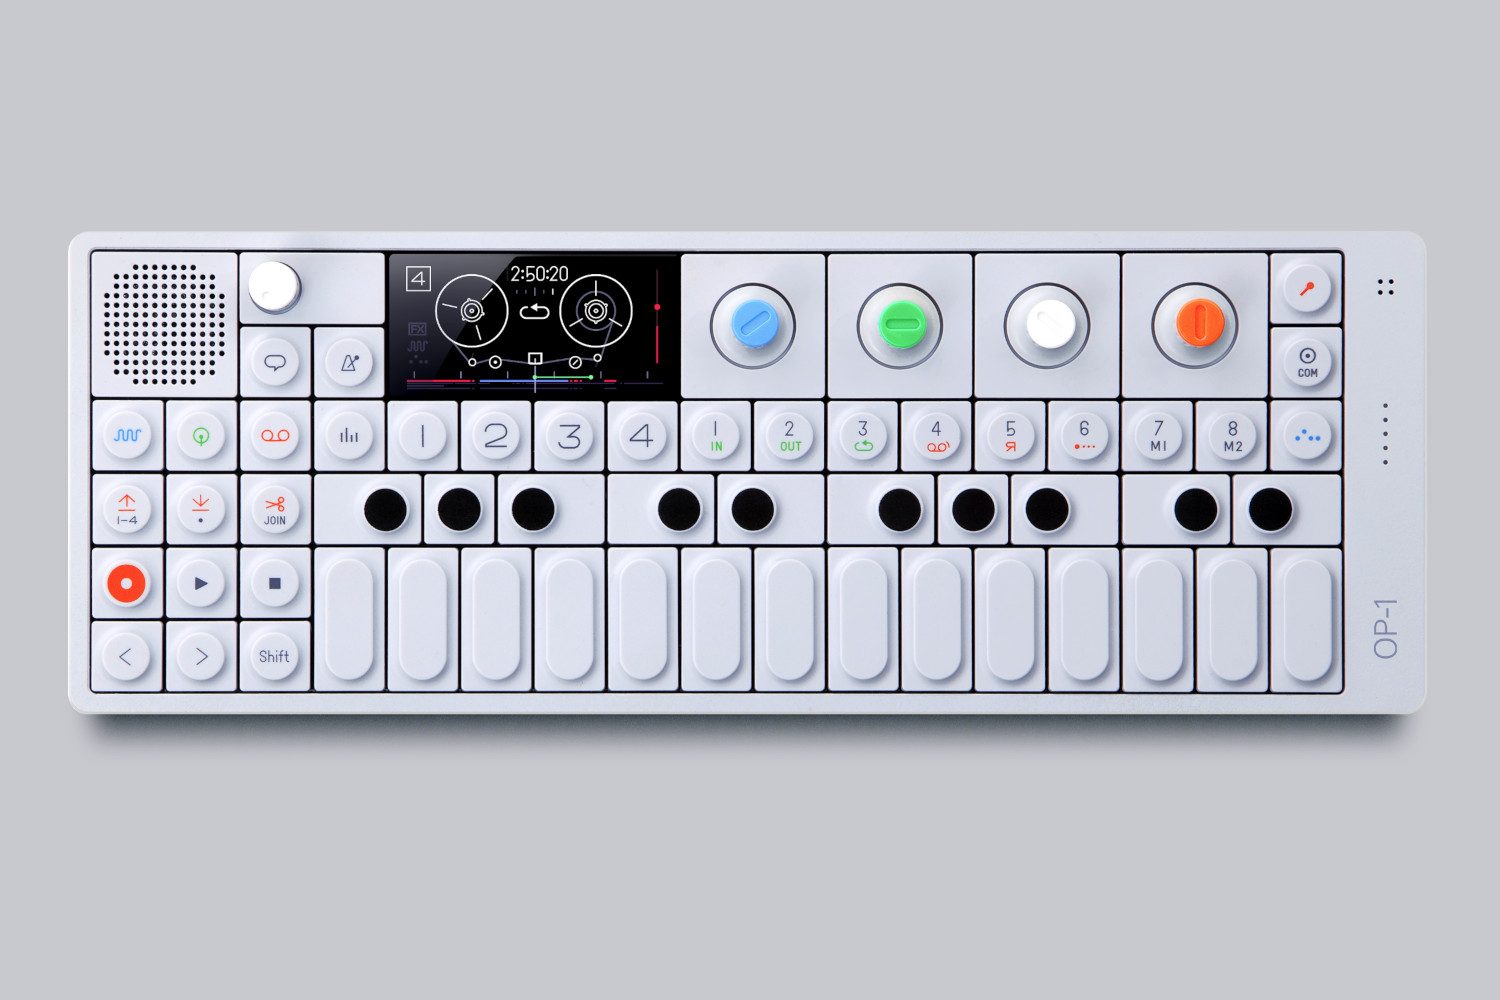 Here’s why the Teenage Engineering OP-1 got that frustrating price hike